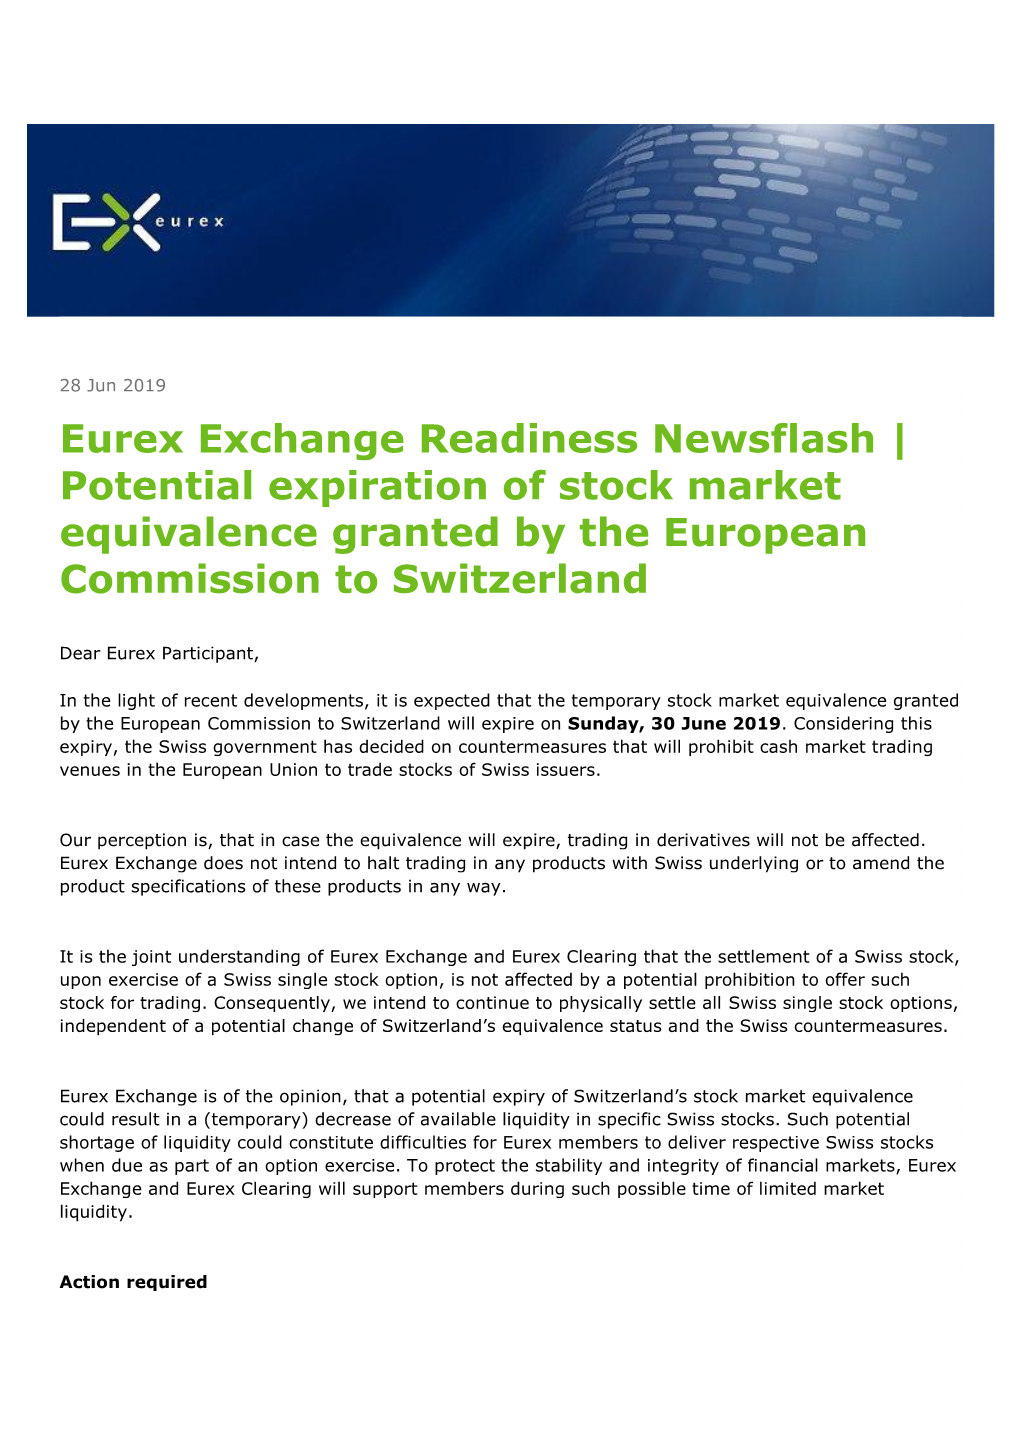 Eurex Exchange Readiness Newsflash | Potential Expiration of Stock Market Equivalence Granted by the European